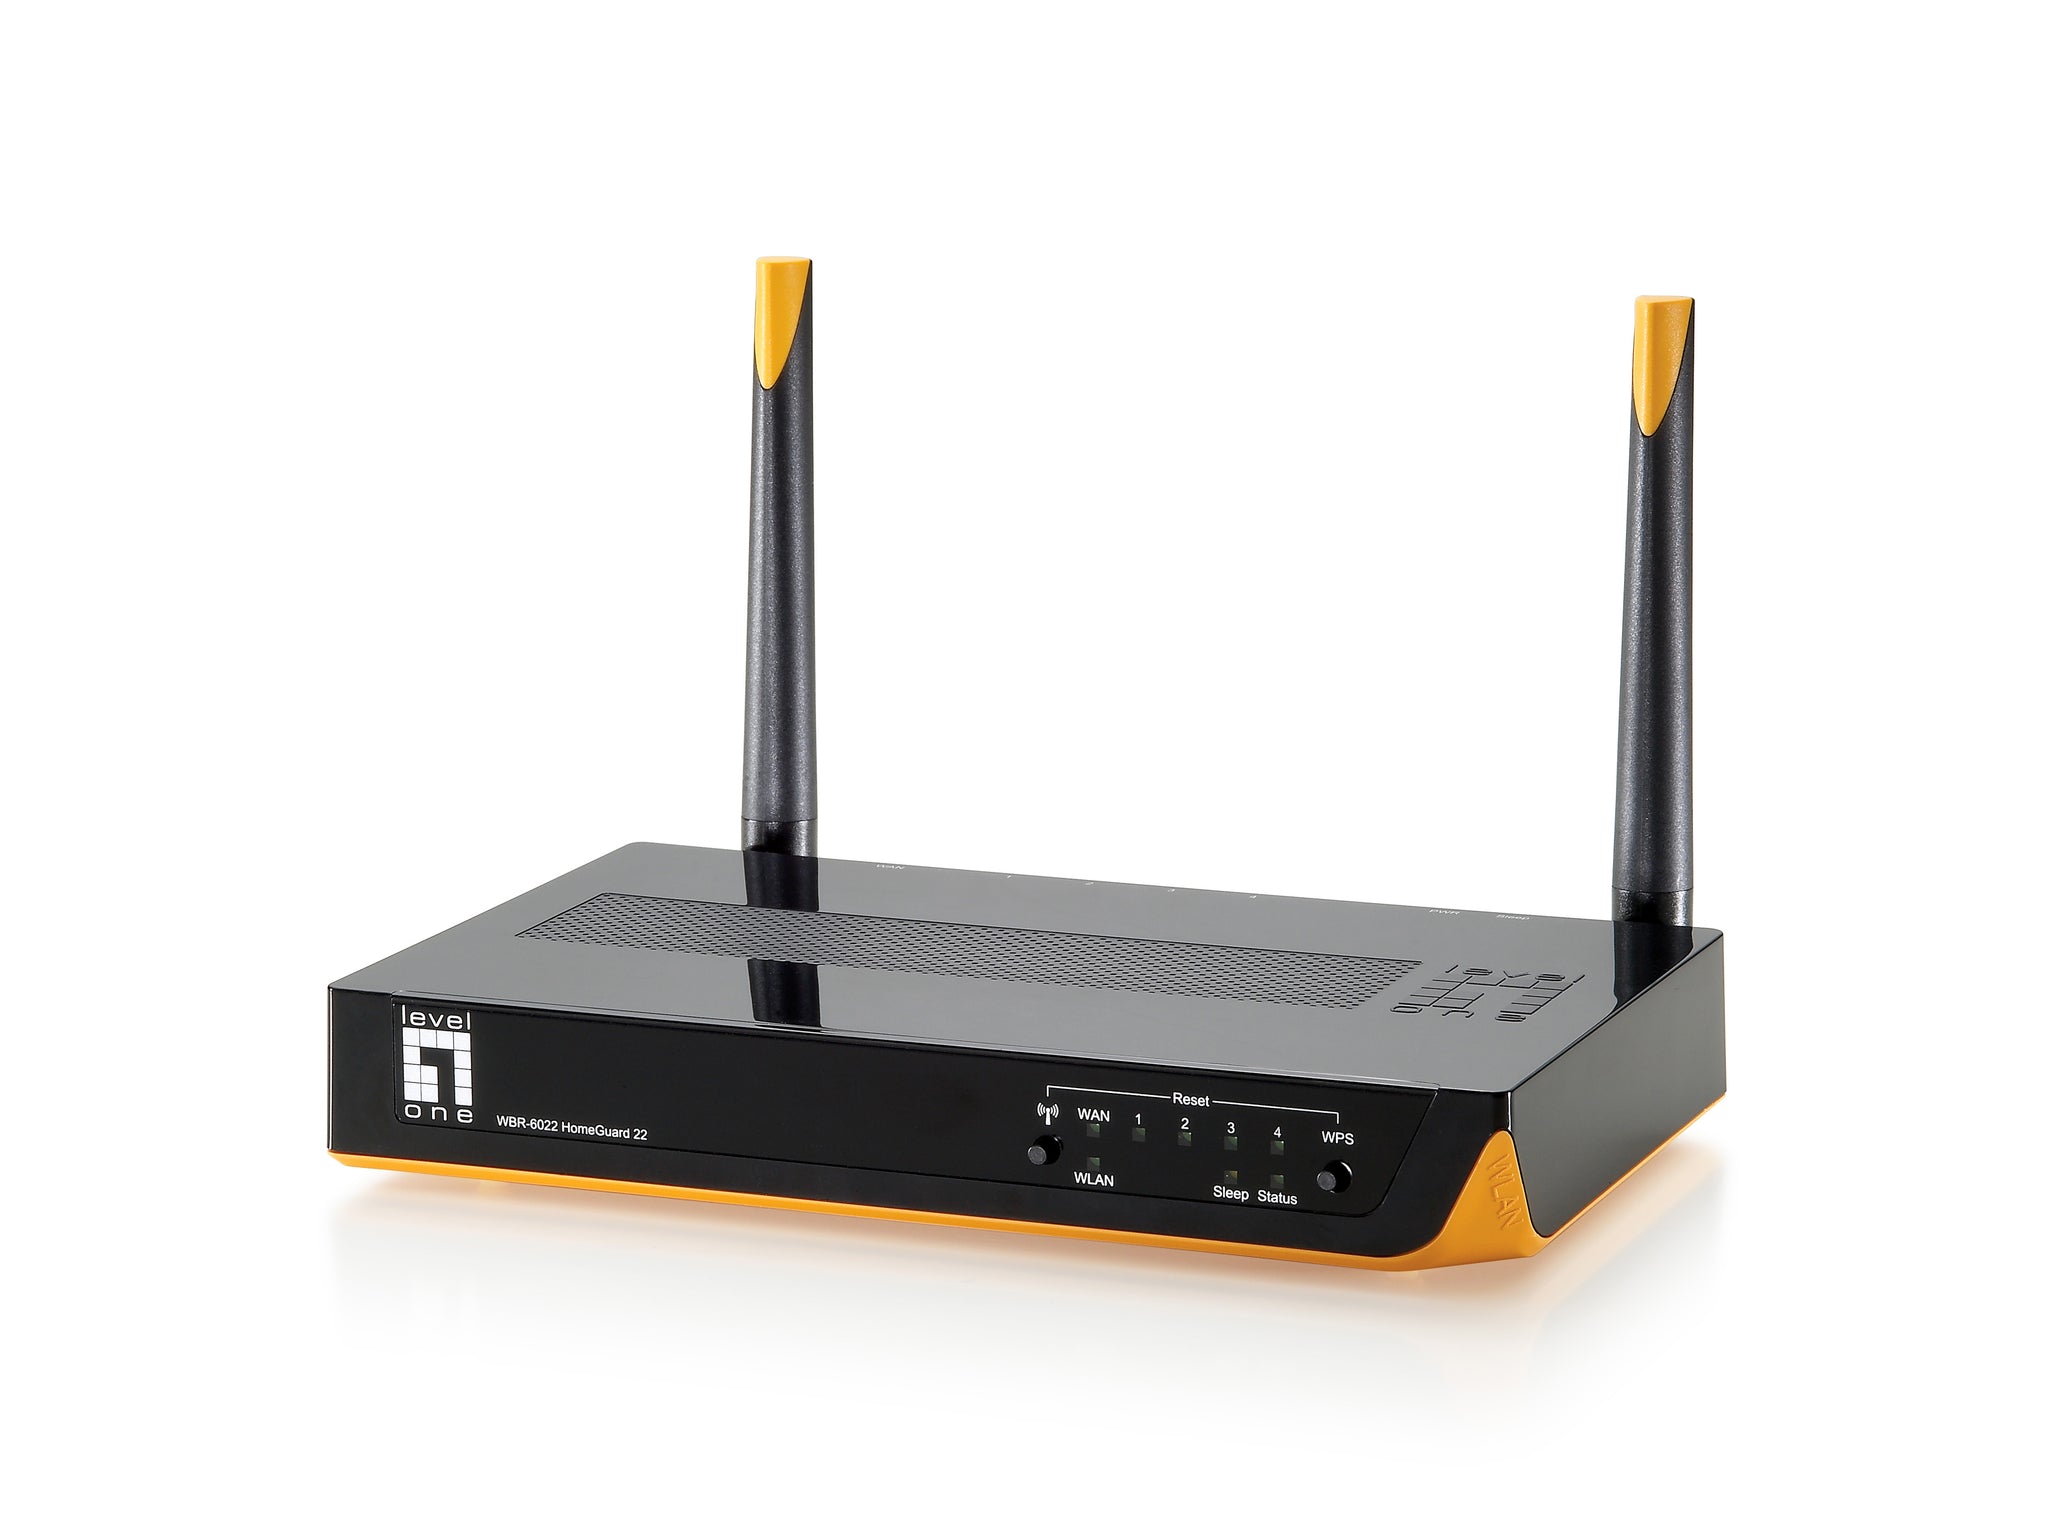 WBR-6022 300Mbps Wireless HomeGuard 22 Router